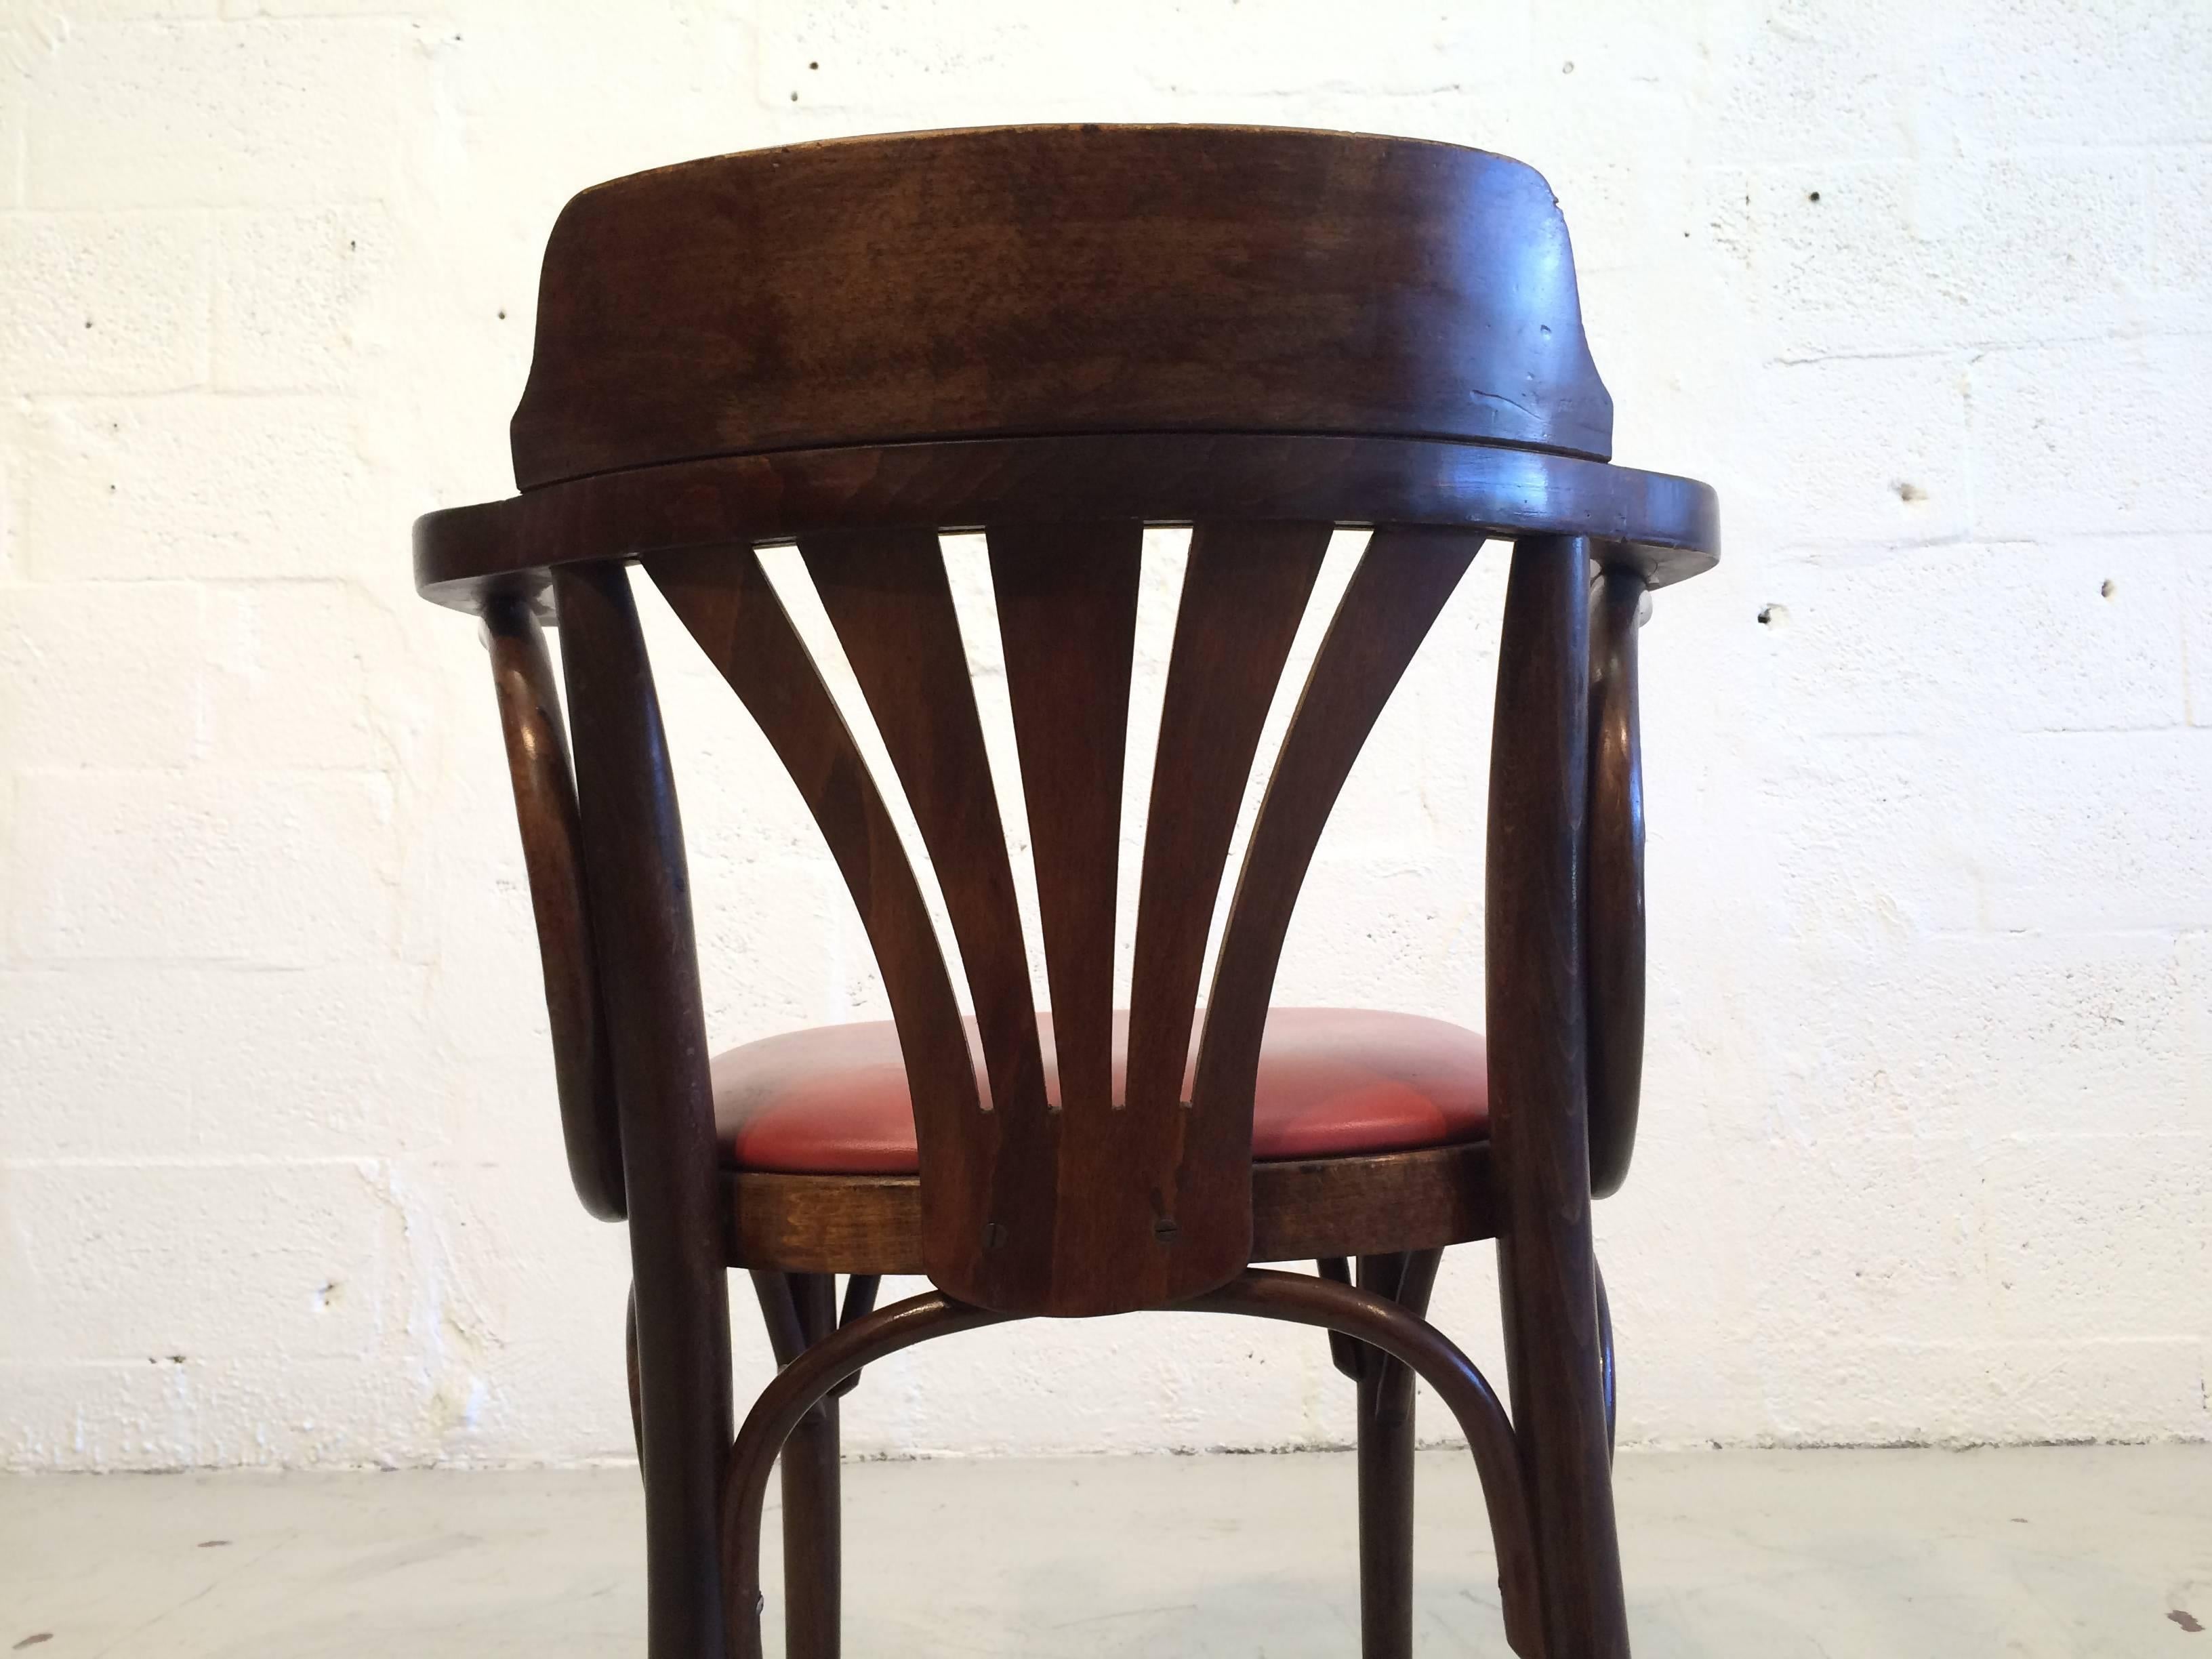 Vienna Secession Six Bentwood Chairs by Drevounia, Czech Republic, 1950s, 12 Chairs Available